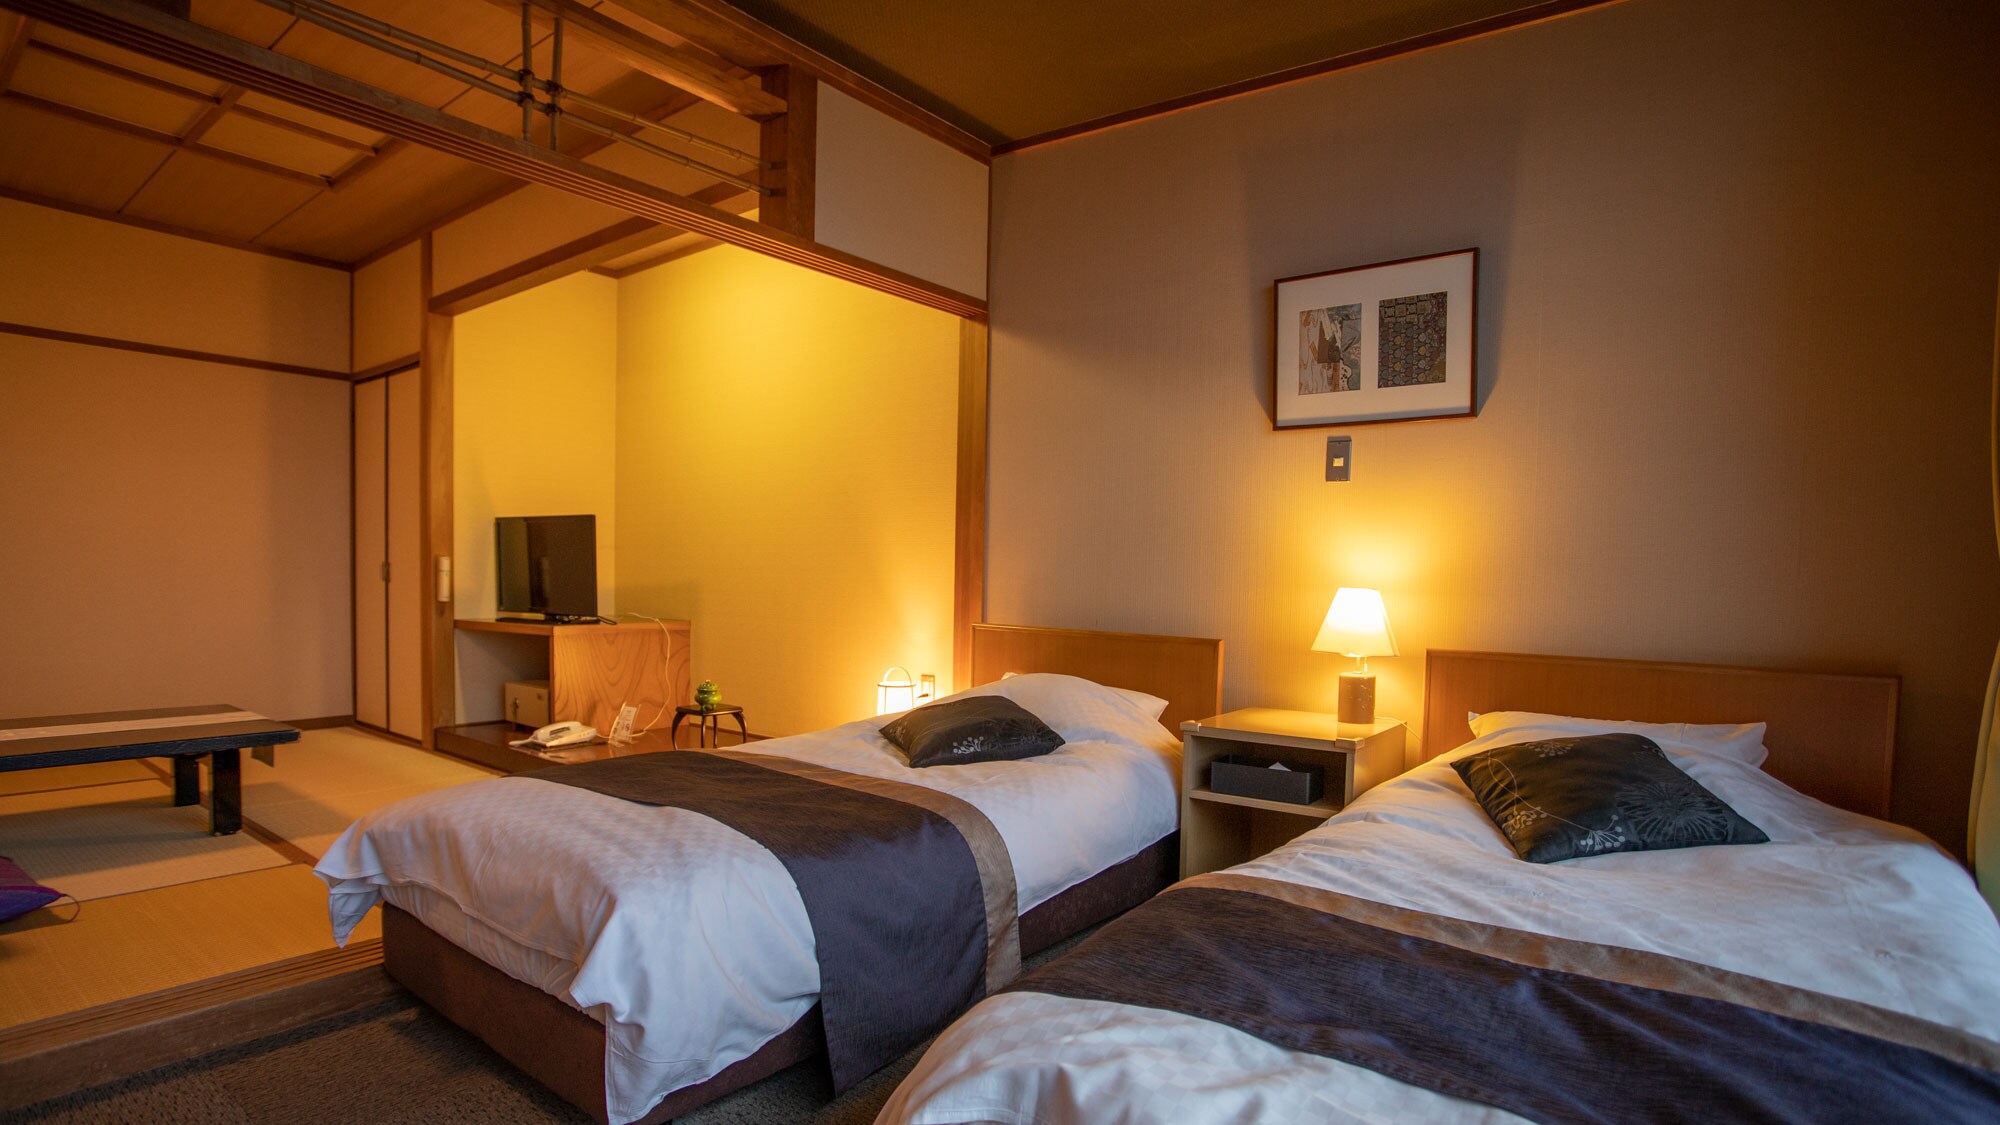 A Japanese-Western style room that combines the calmness of a Japanese inn with the convenience of a hotel. High table rooms are also available, so please